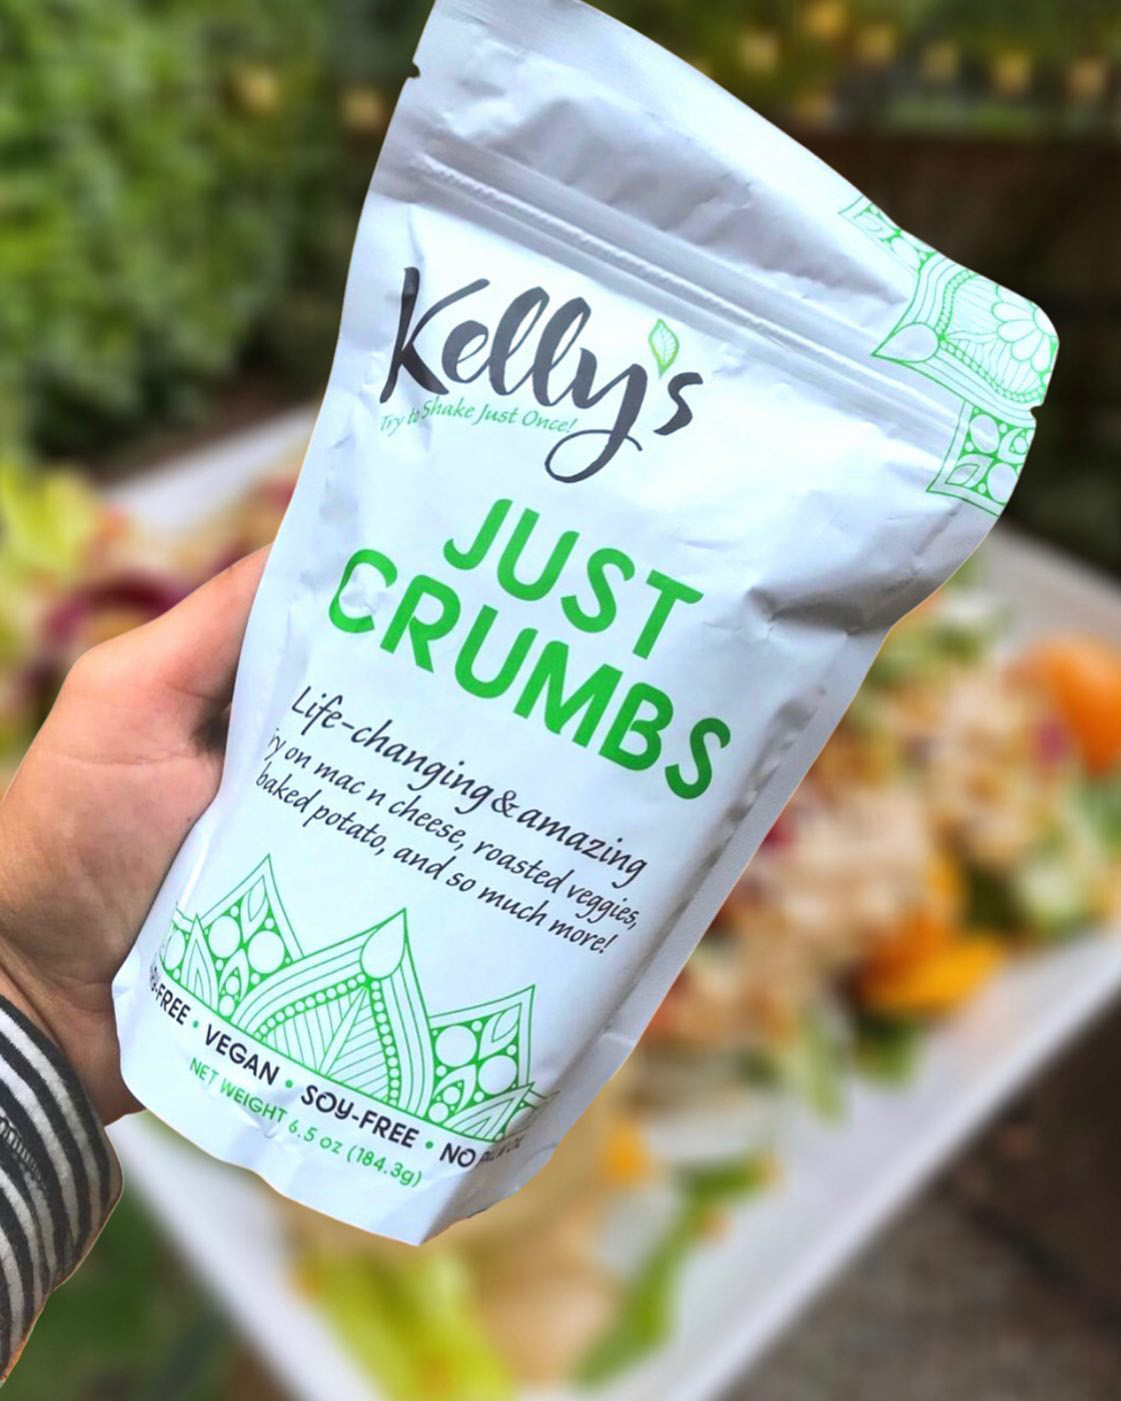 Kelly’s Croutons